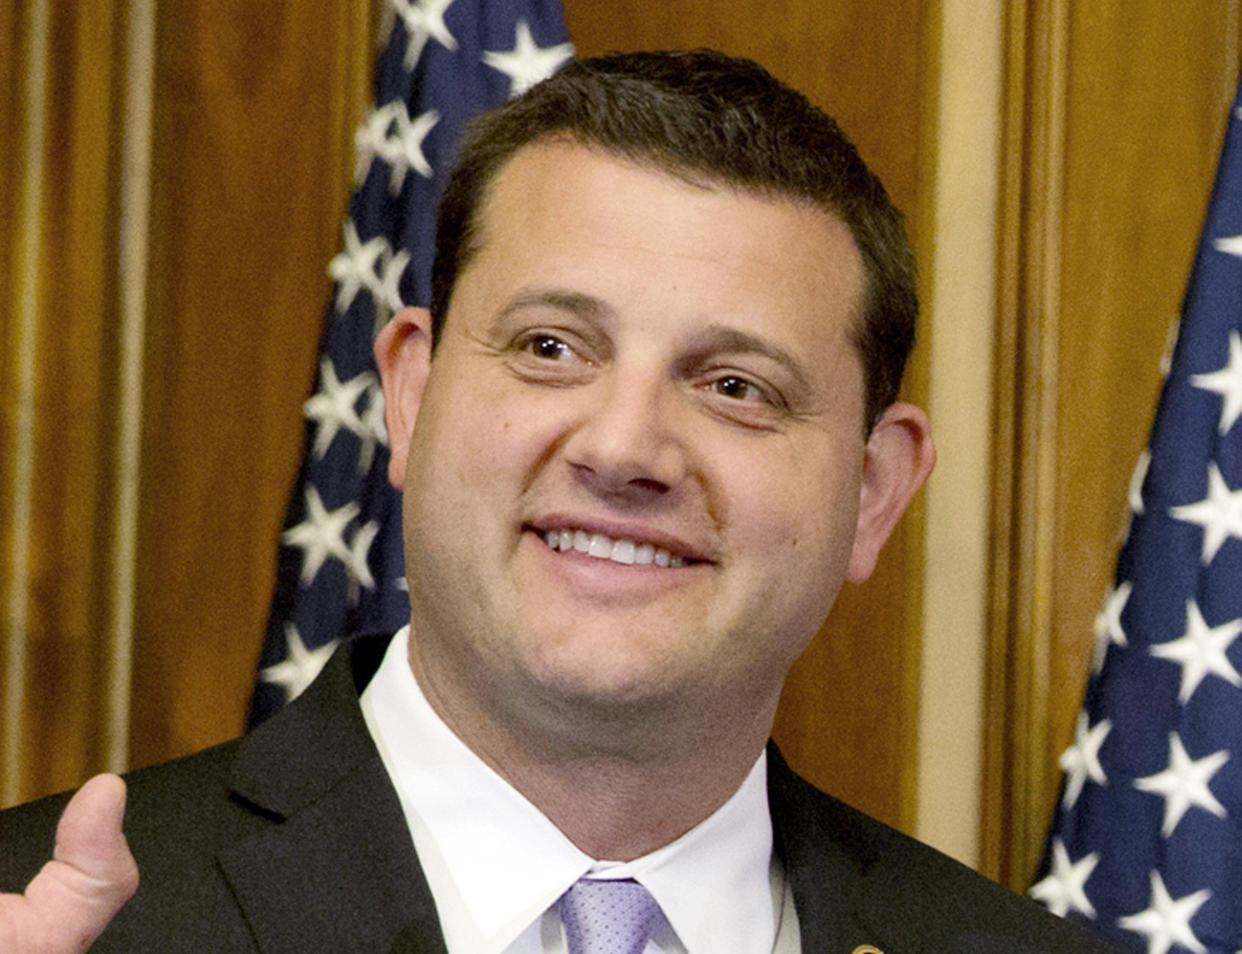 In this Jan. 6, 2015 file photo, Rep. David Valadao, R-Calif., poses during a ceremonial re-enactment of his swearing-in ceremony in the Rayburn Room on Capitol Hill in Washington. (Jacquelyn Martin/AP Photo)